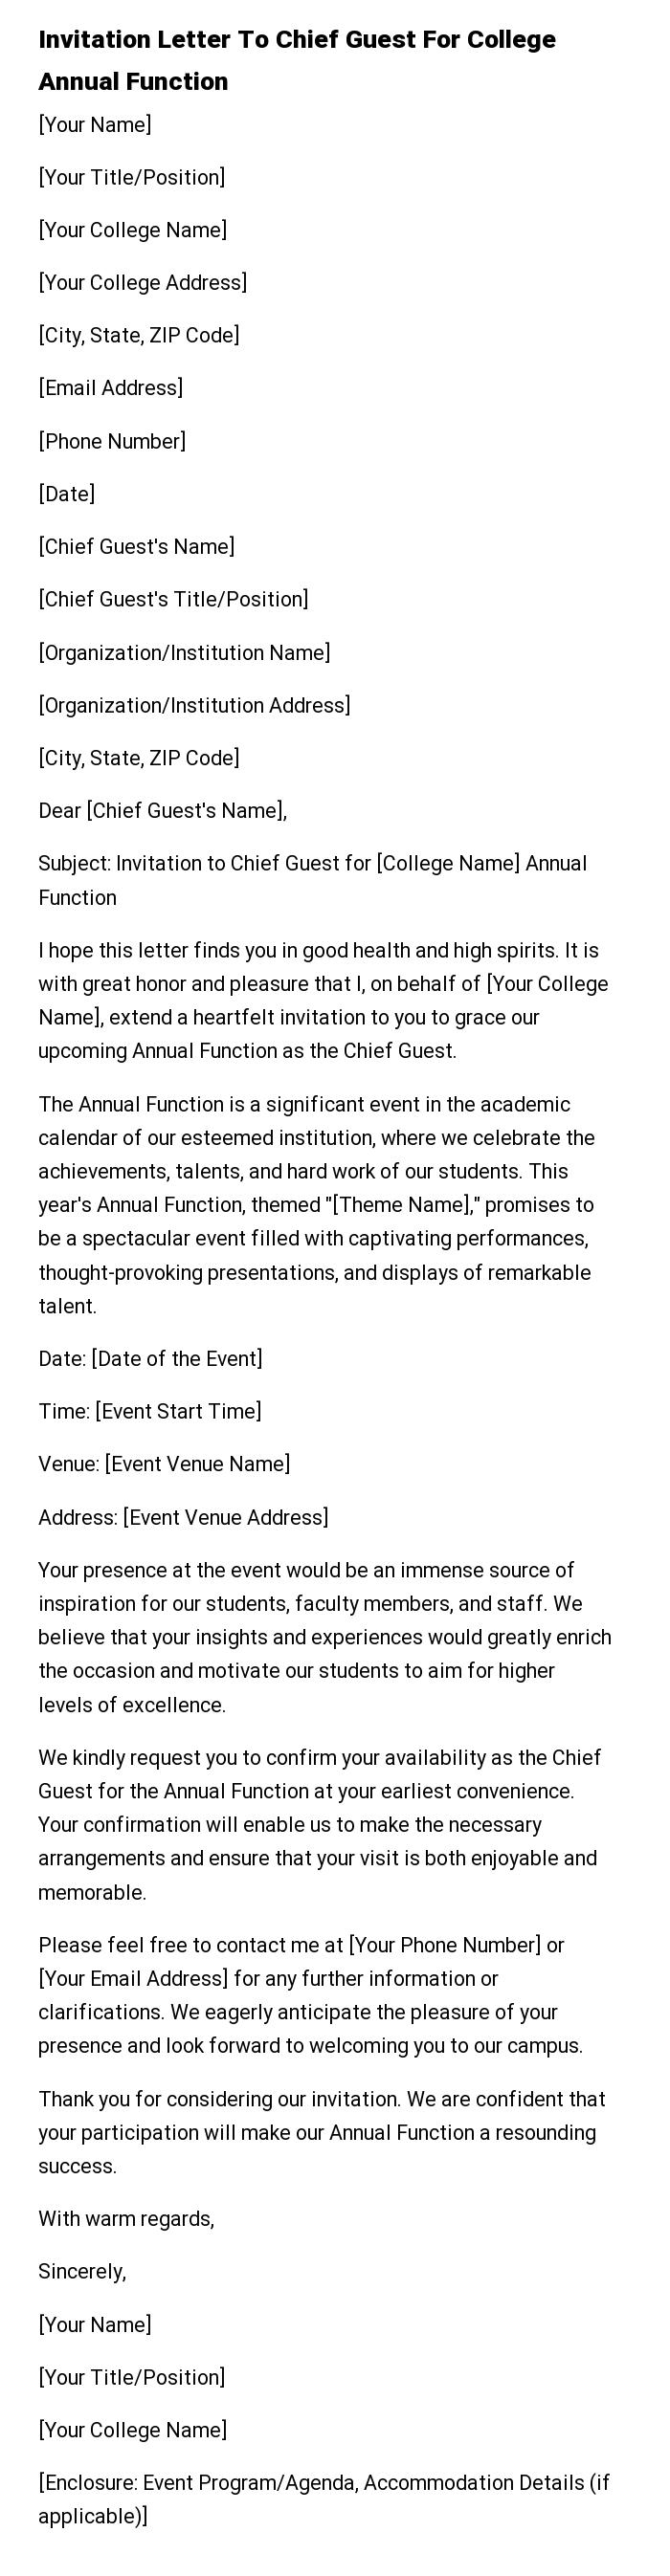 Invitation Letter To Chief Guest For College Annual Function